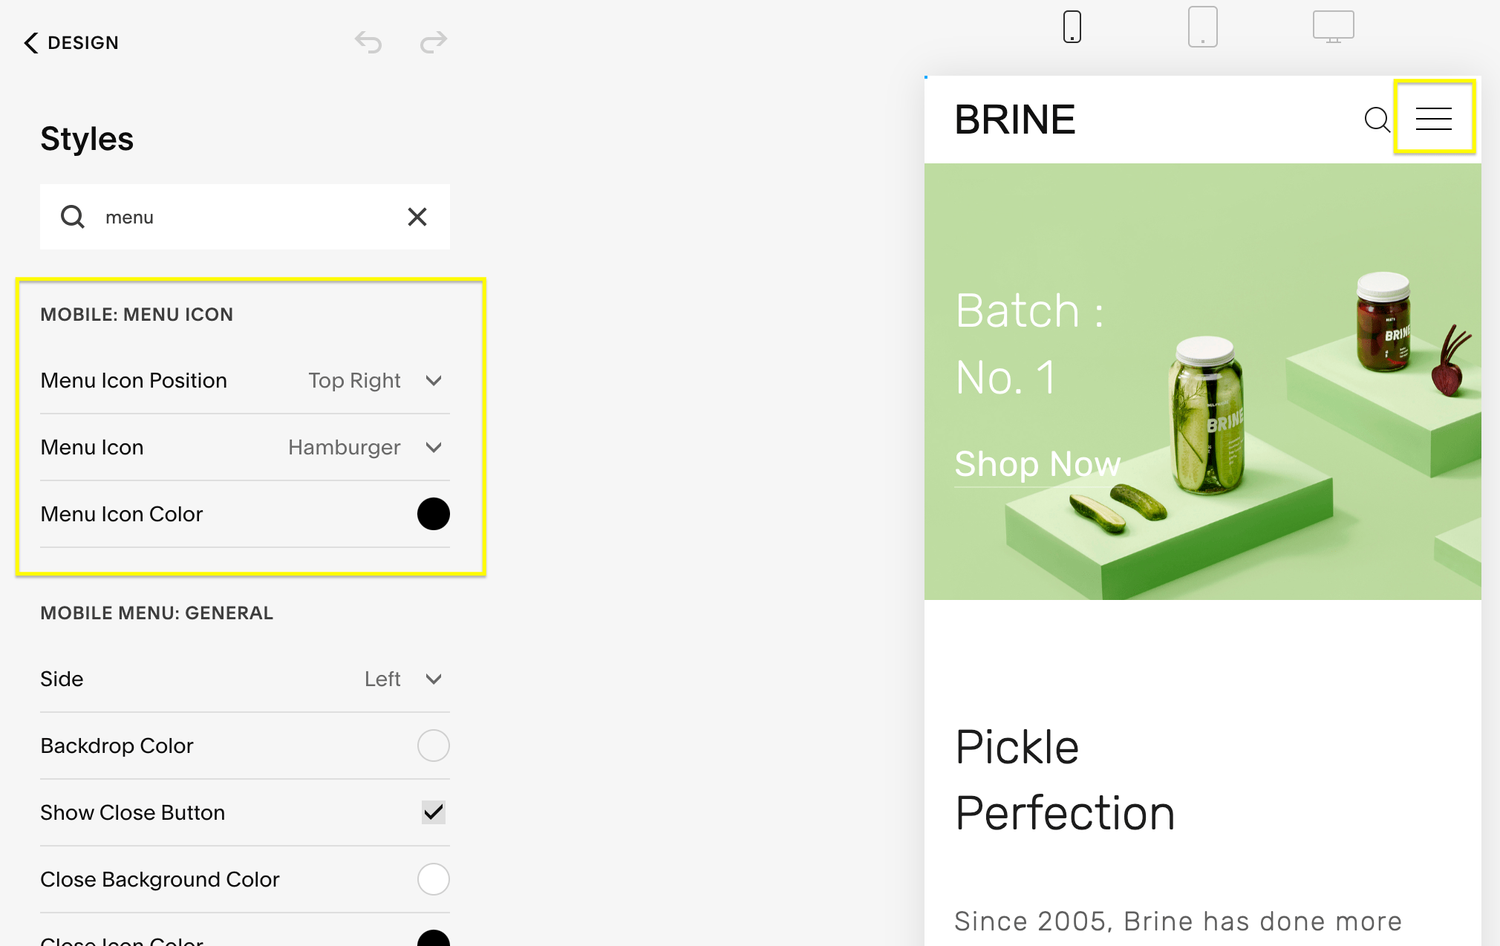 How to customize mobile menu in Squarespace